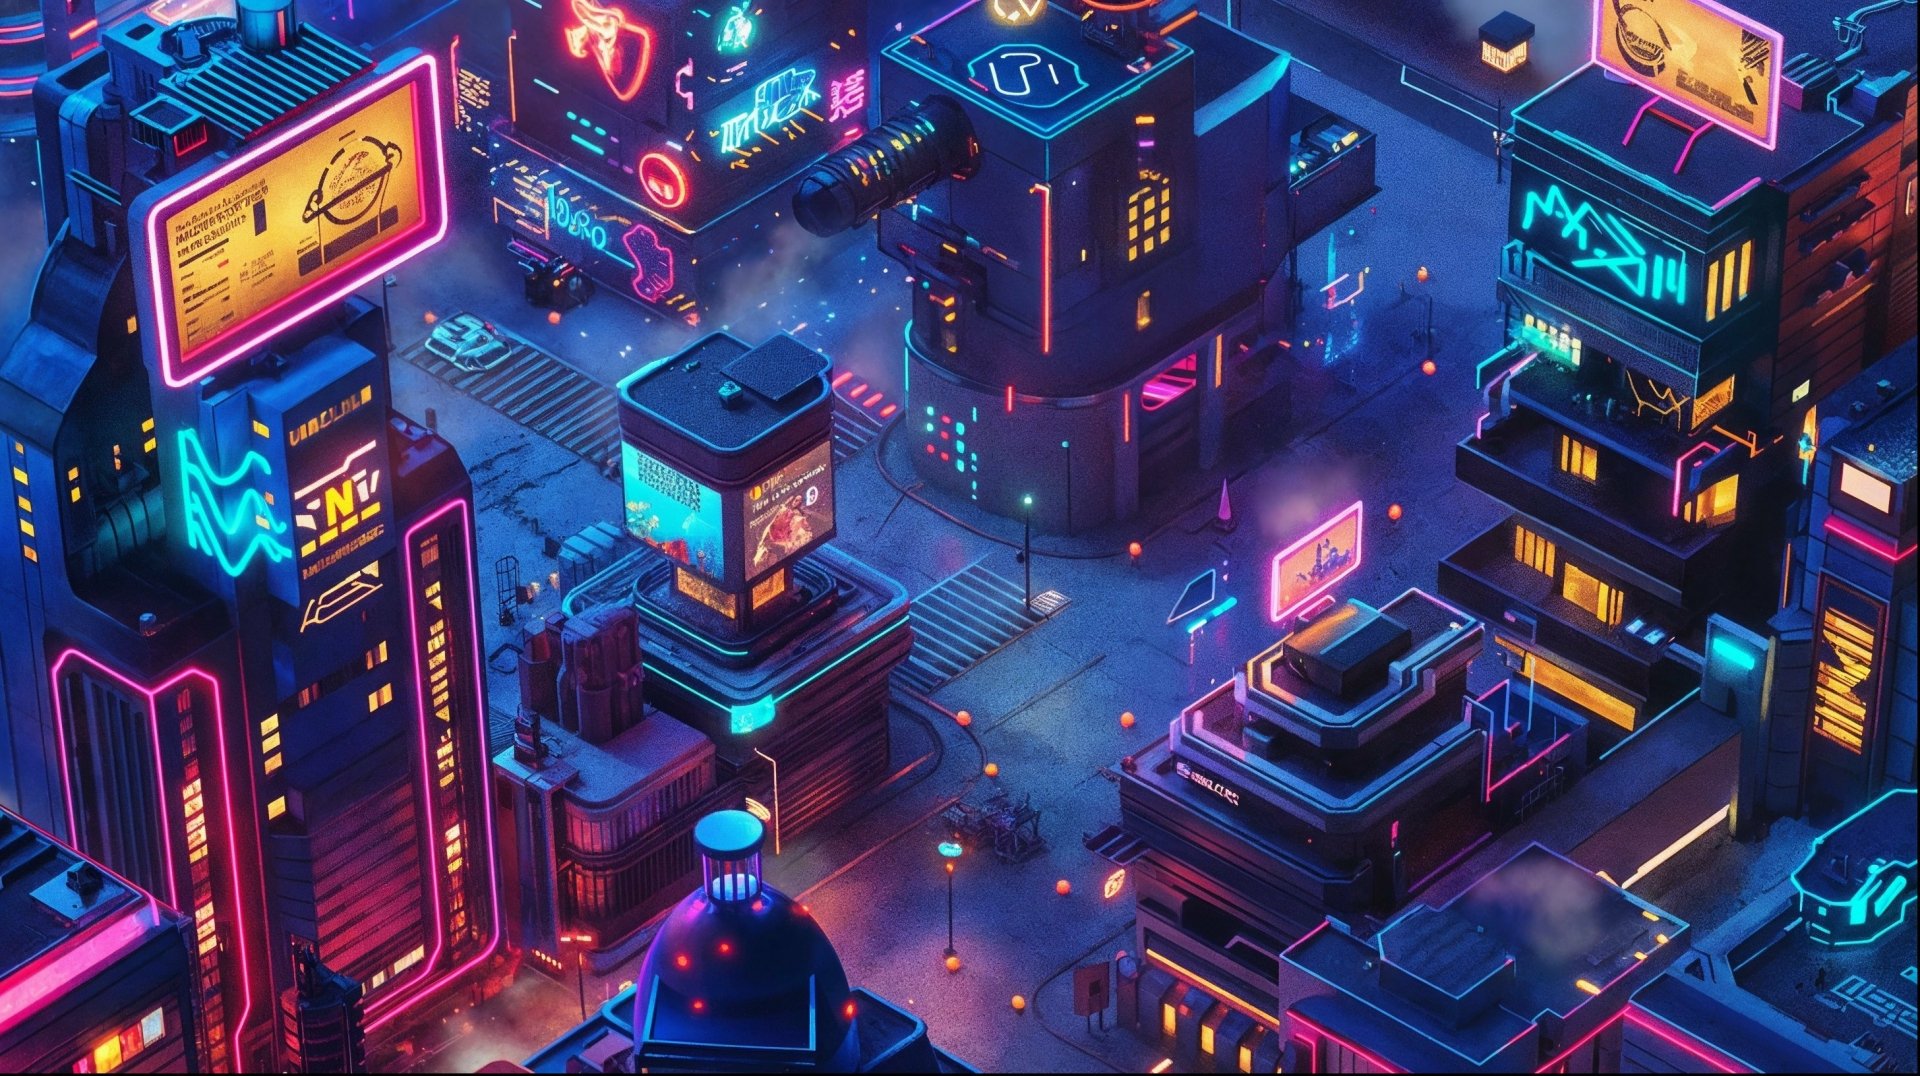 HD desktop wallpaper featuring a vibrant isometric view of a cyberpunk cityscape at night, illuminated by neon lights and futuristic advertisements.